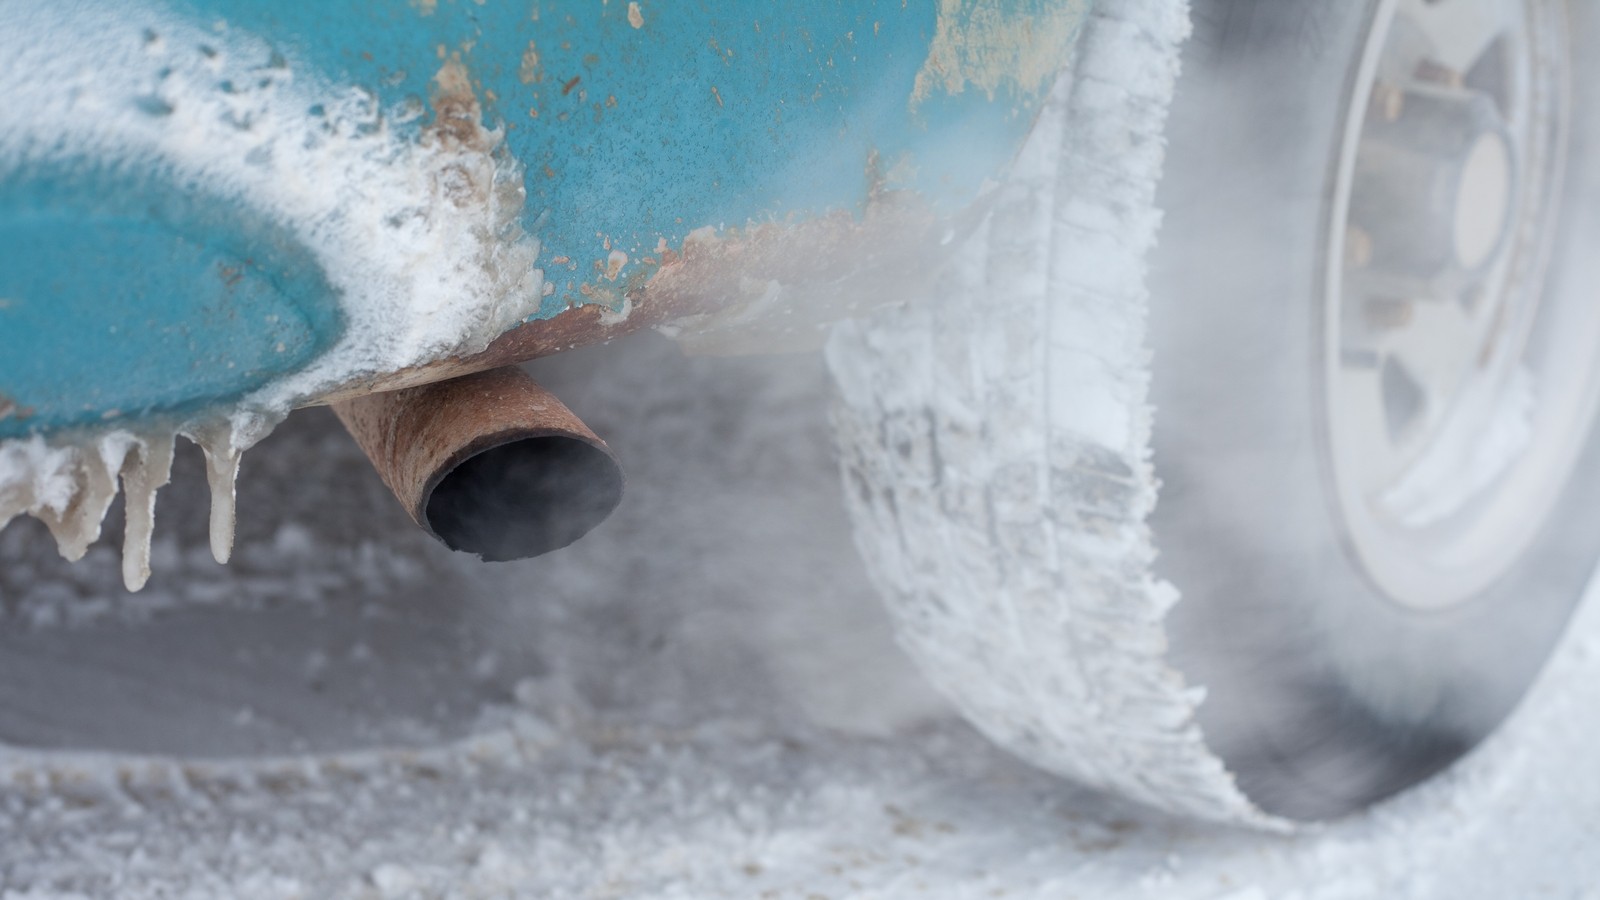 Vehicle exhaust pipe in winter